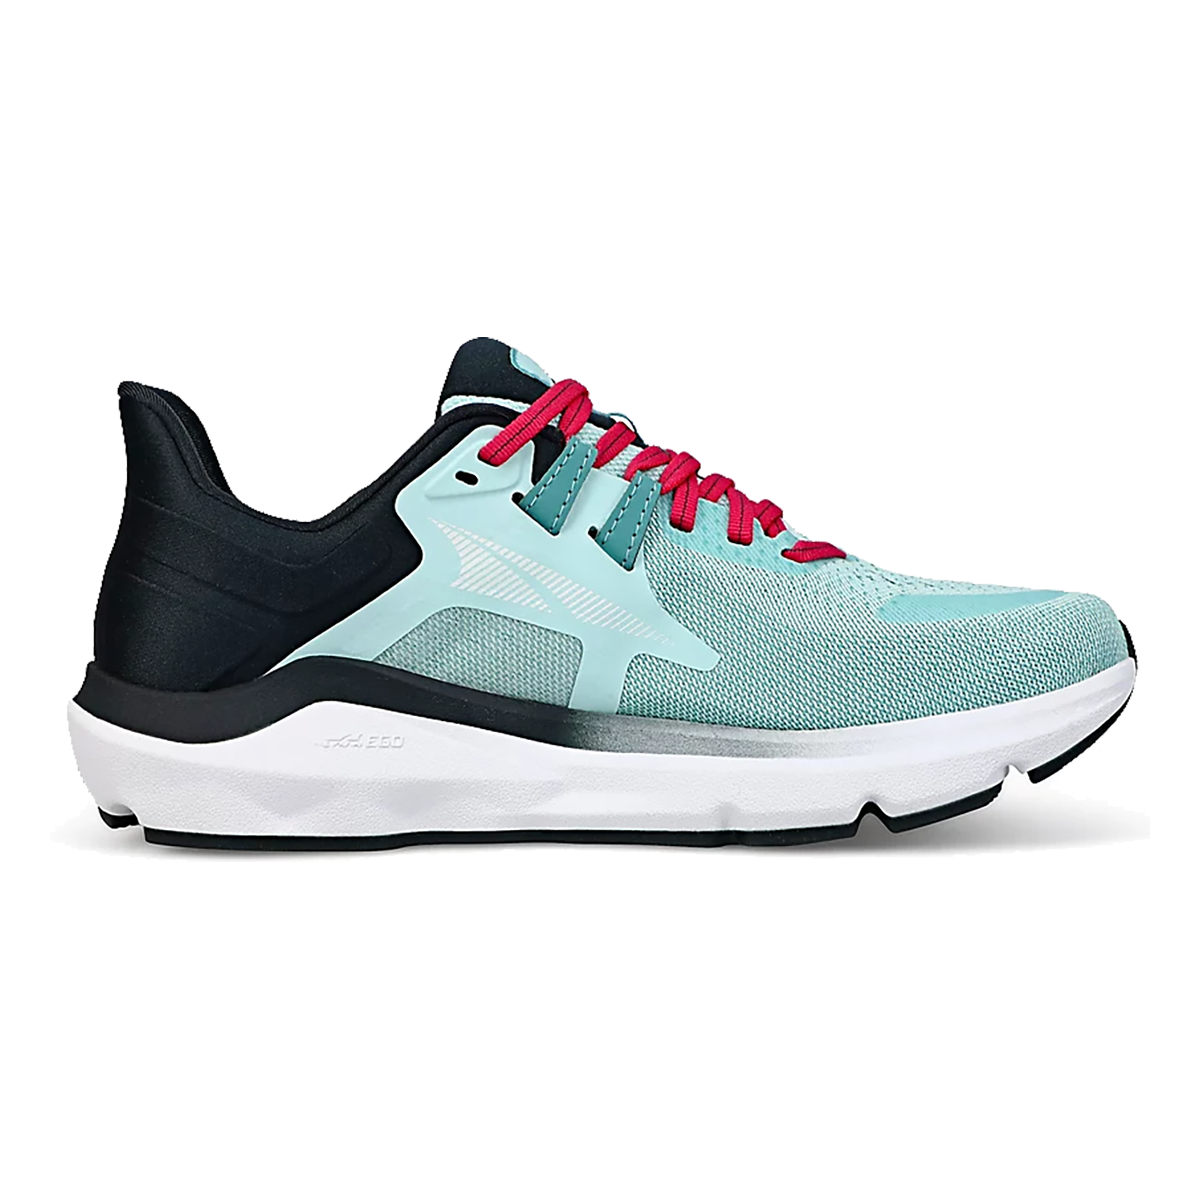 Altra Women's Provision 6 Shoes in Black/Heather Light Blue   Size: 8.5 Width: D   Fit2Run